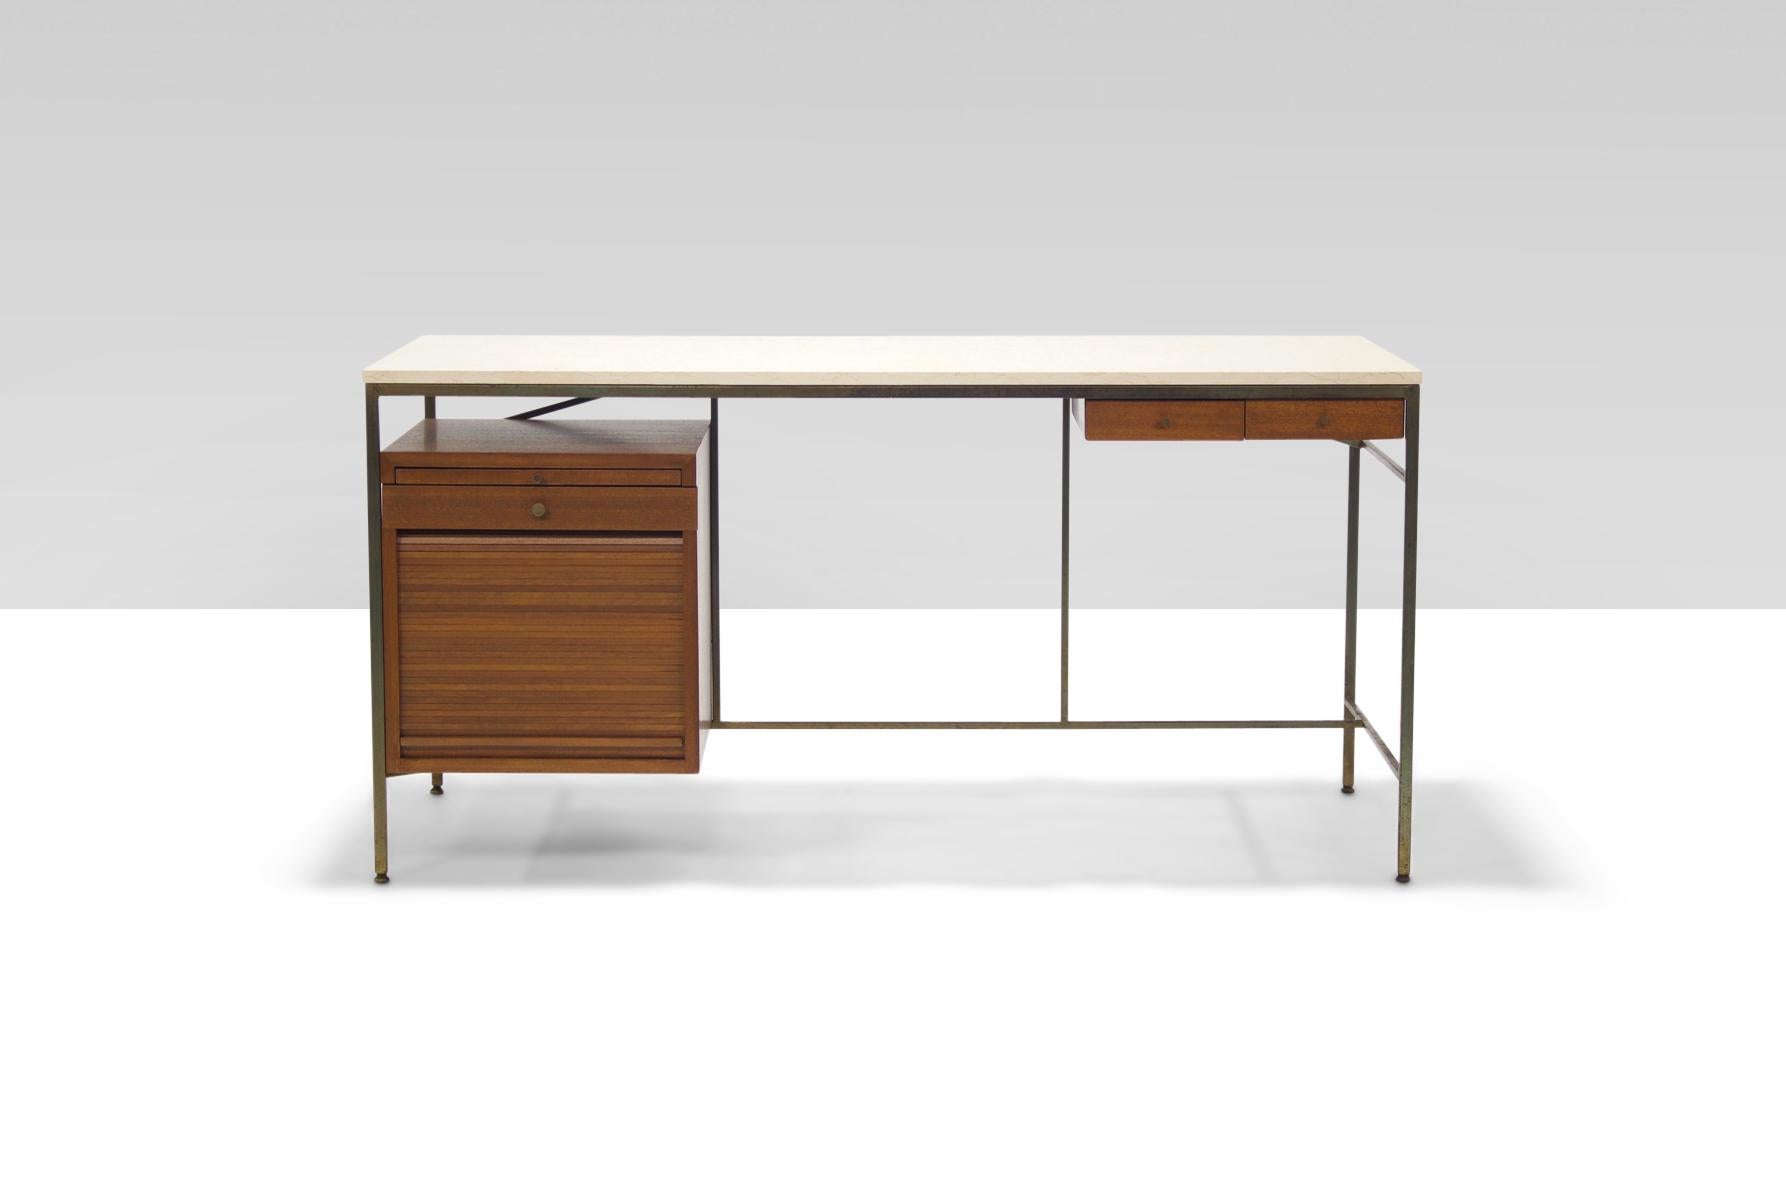 Rare architectural walnut and stone desk designed by Paul Mccobb for Calvin Furniture in the early 1950's.

The left hand pedestal features a slide out work surface, a small drawer, and a tambour front door that reveals a larger storage